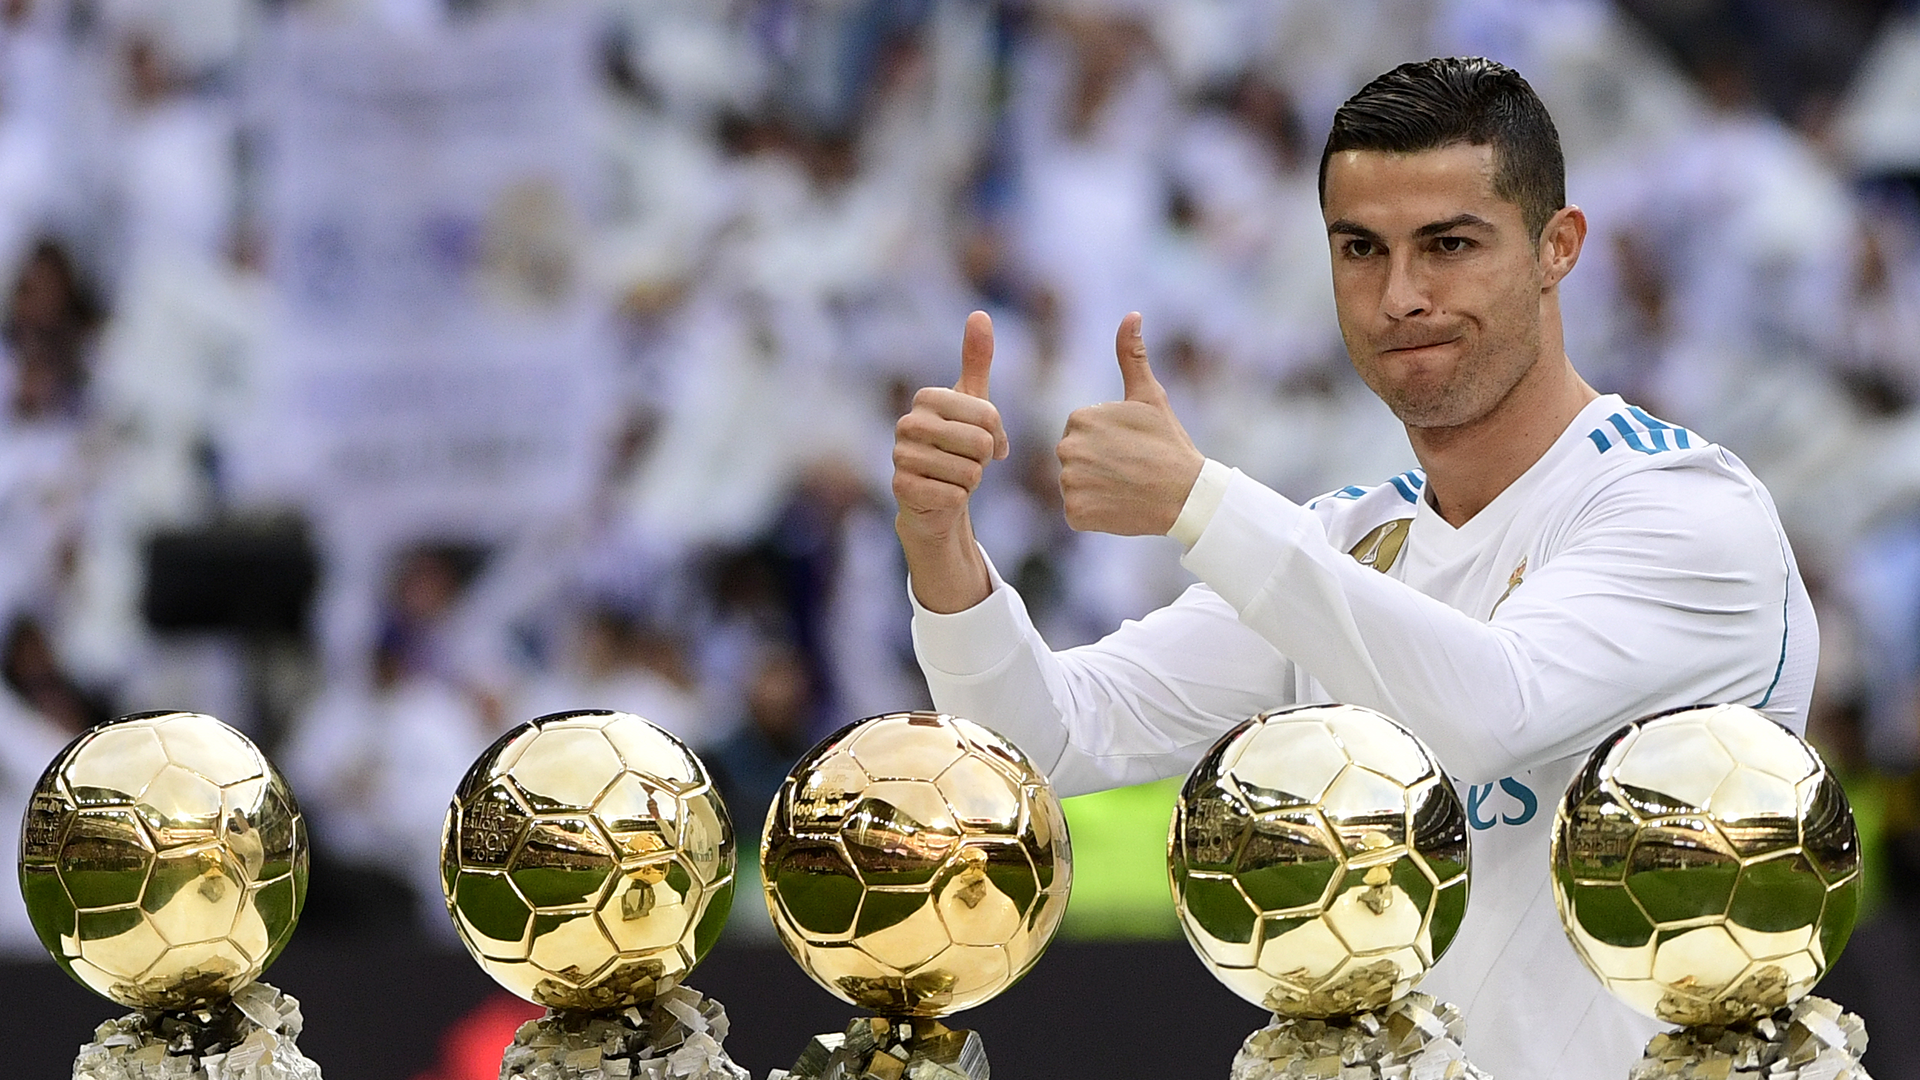 Ballon d'Or vs FIFA's The Best: What's the difference between two best player awards?